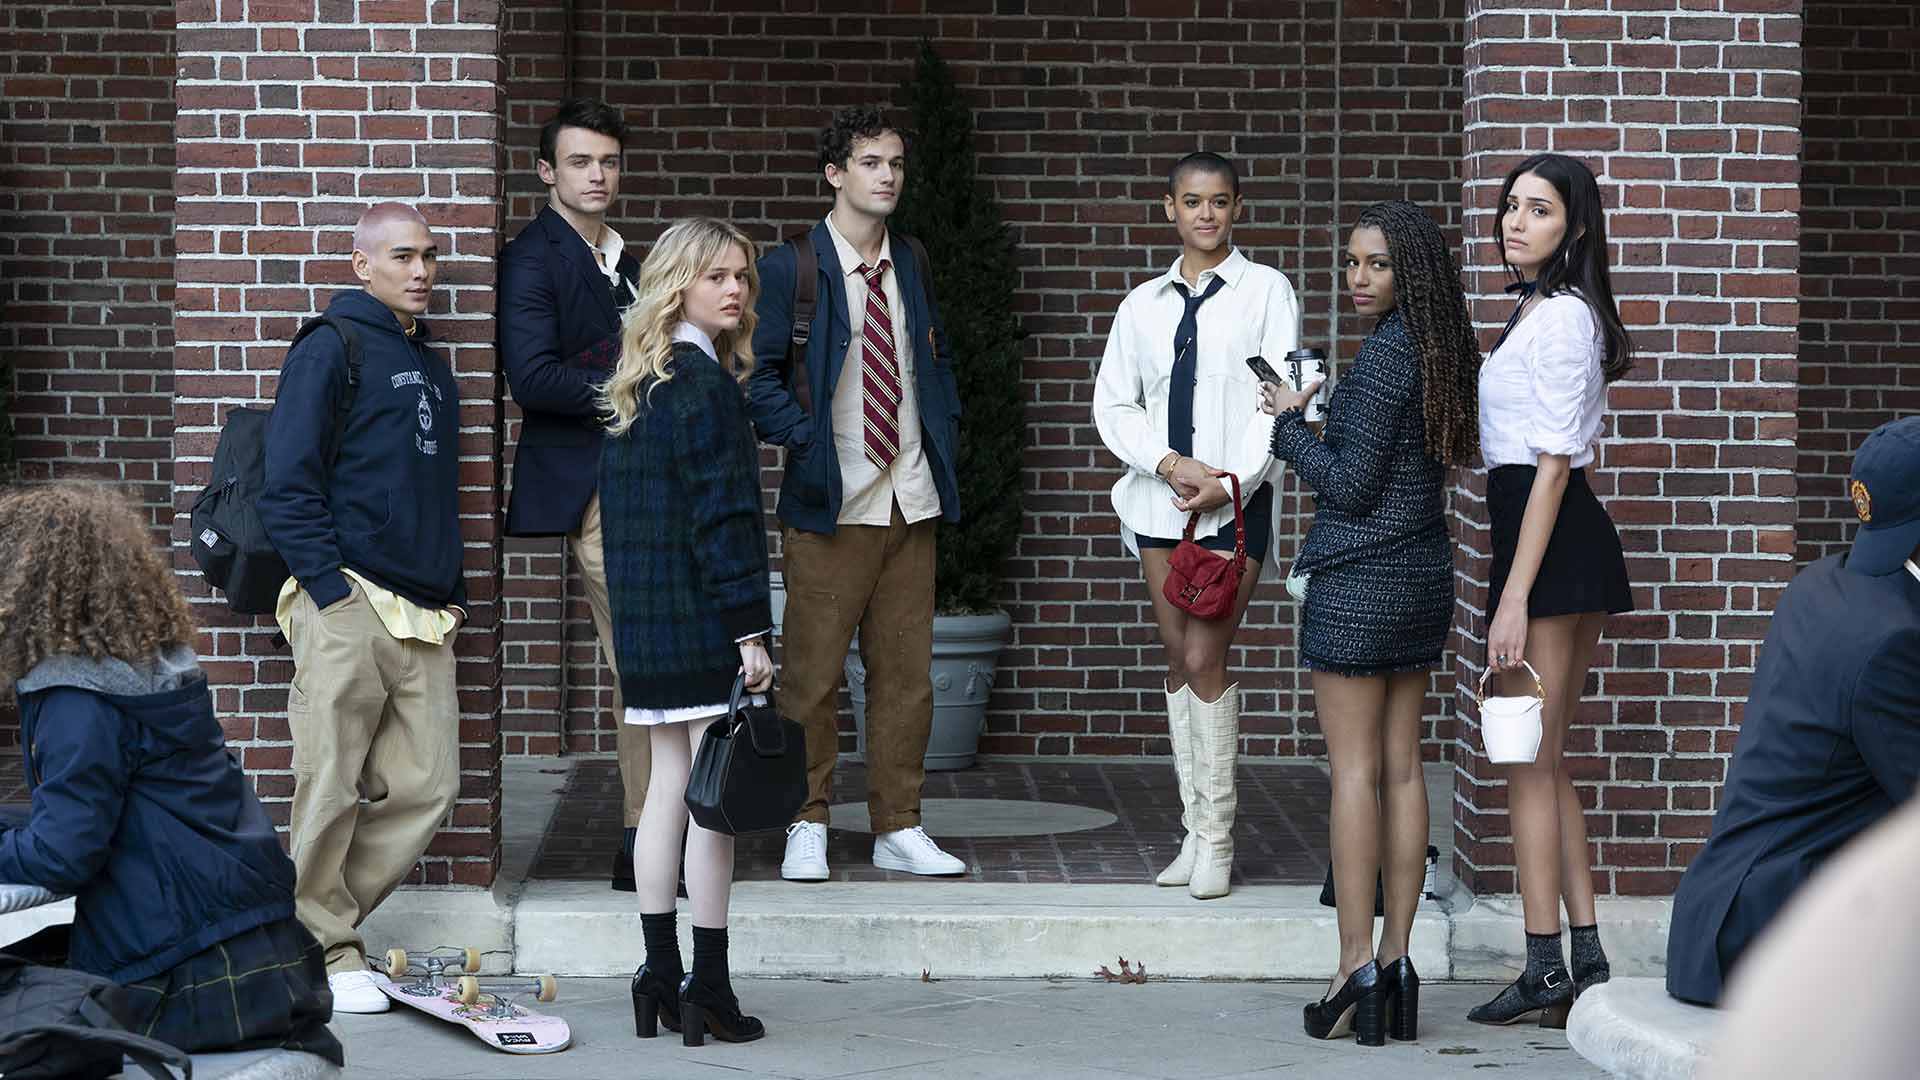 The New 'Gossip Girl' Revival Has Just Dropped Its First Trailer and Announced Its Release Date